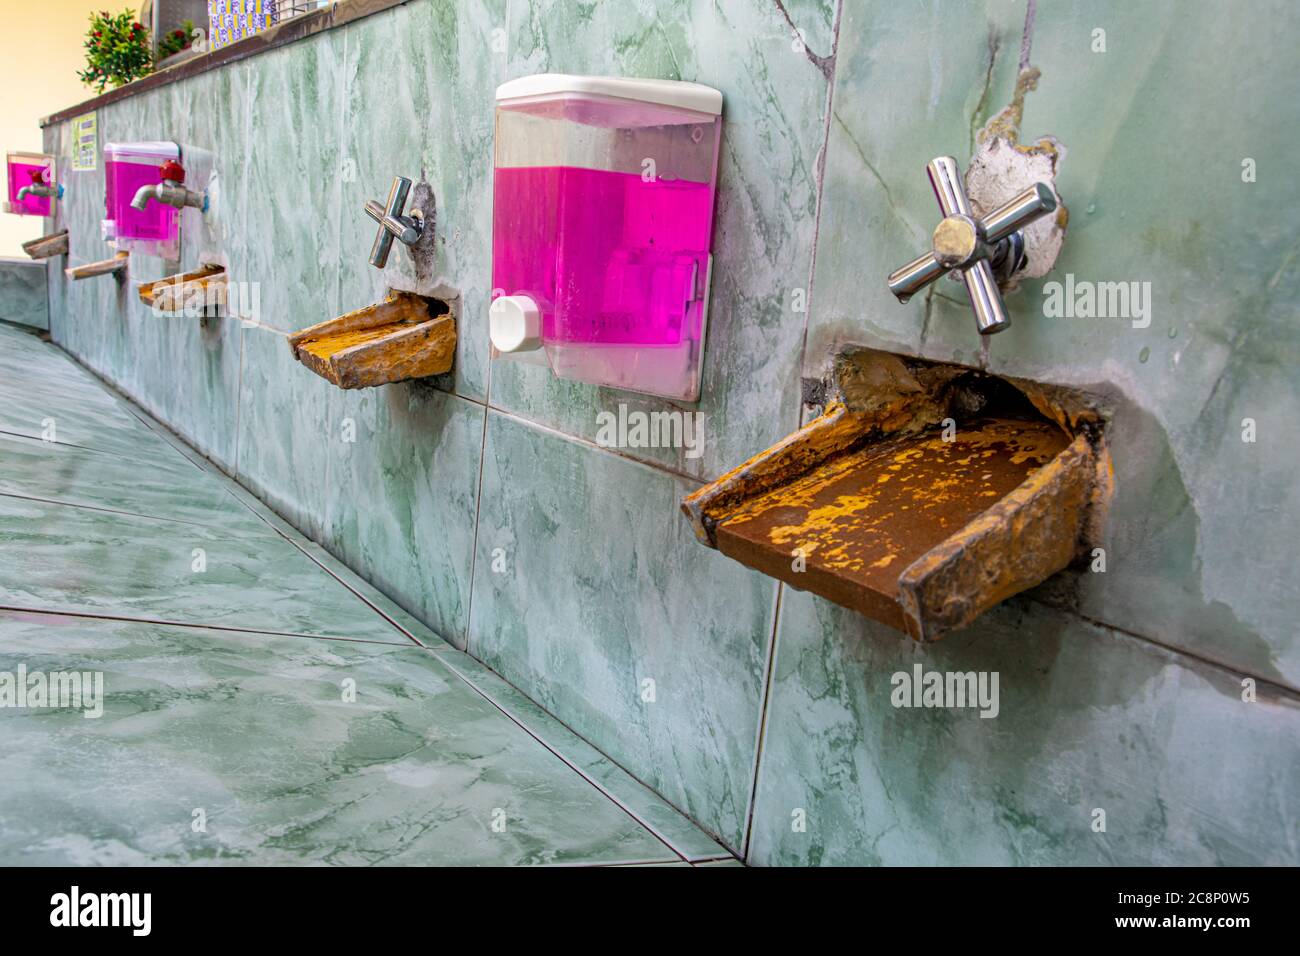 A public outdoors washroom in Thailand, close up. Stock Photo